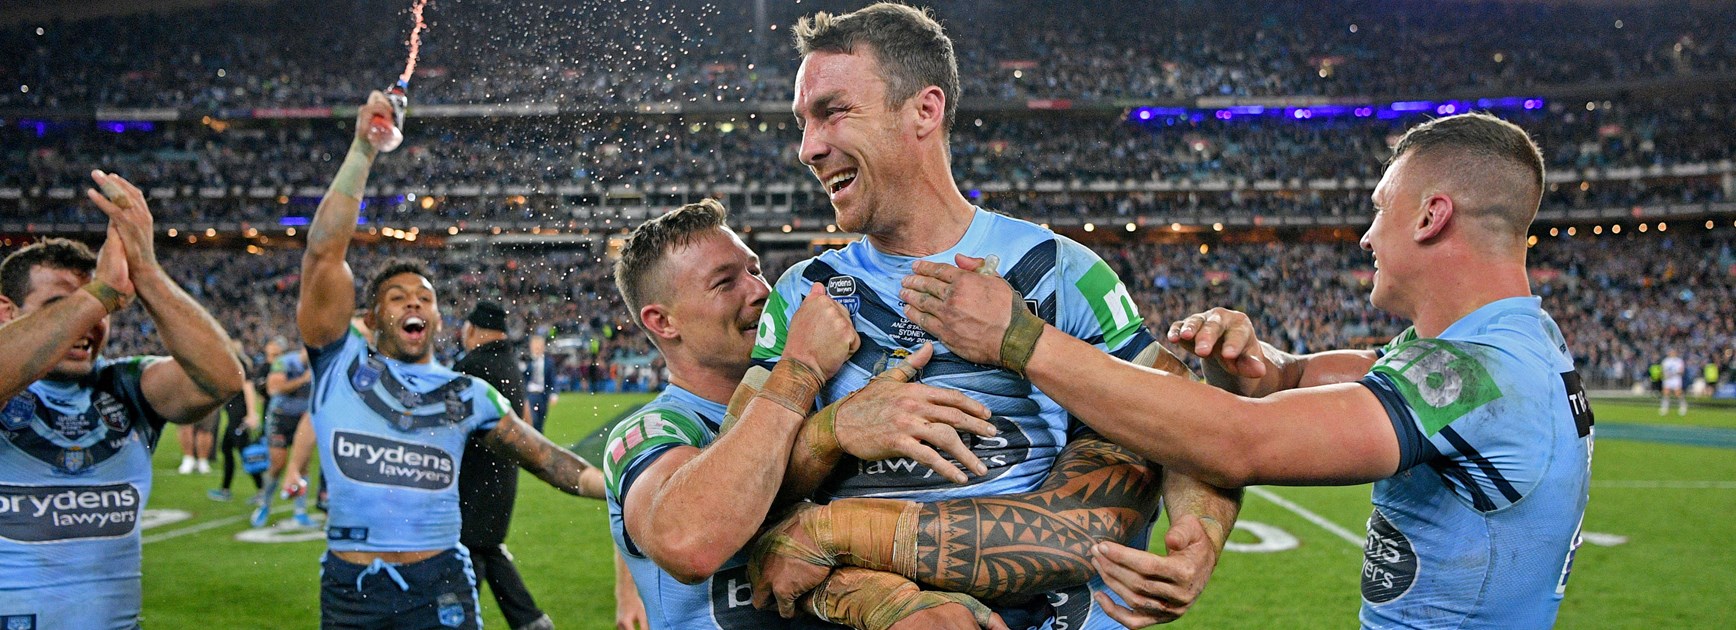 Tedesco scores last-gasp try for NSW to win Origin series over Maroons